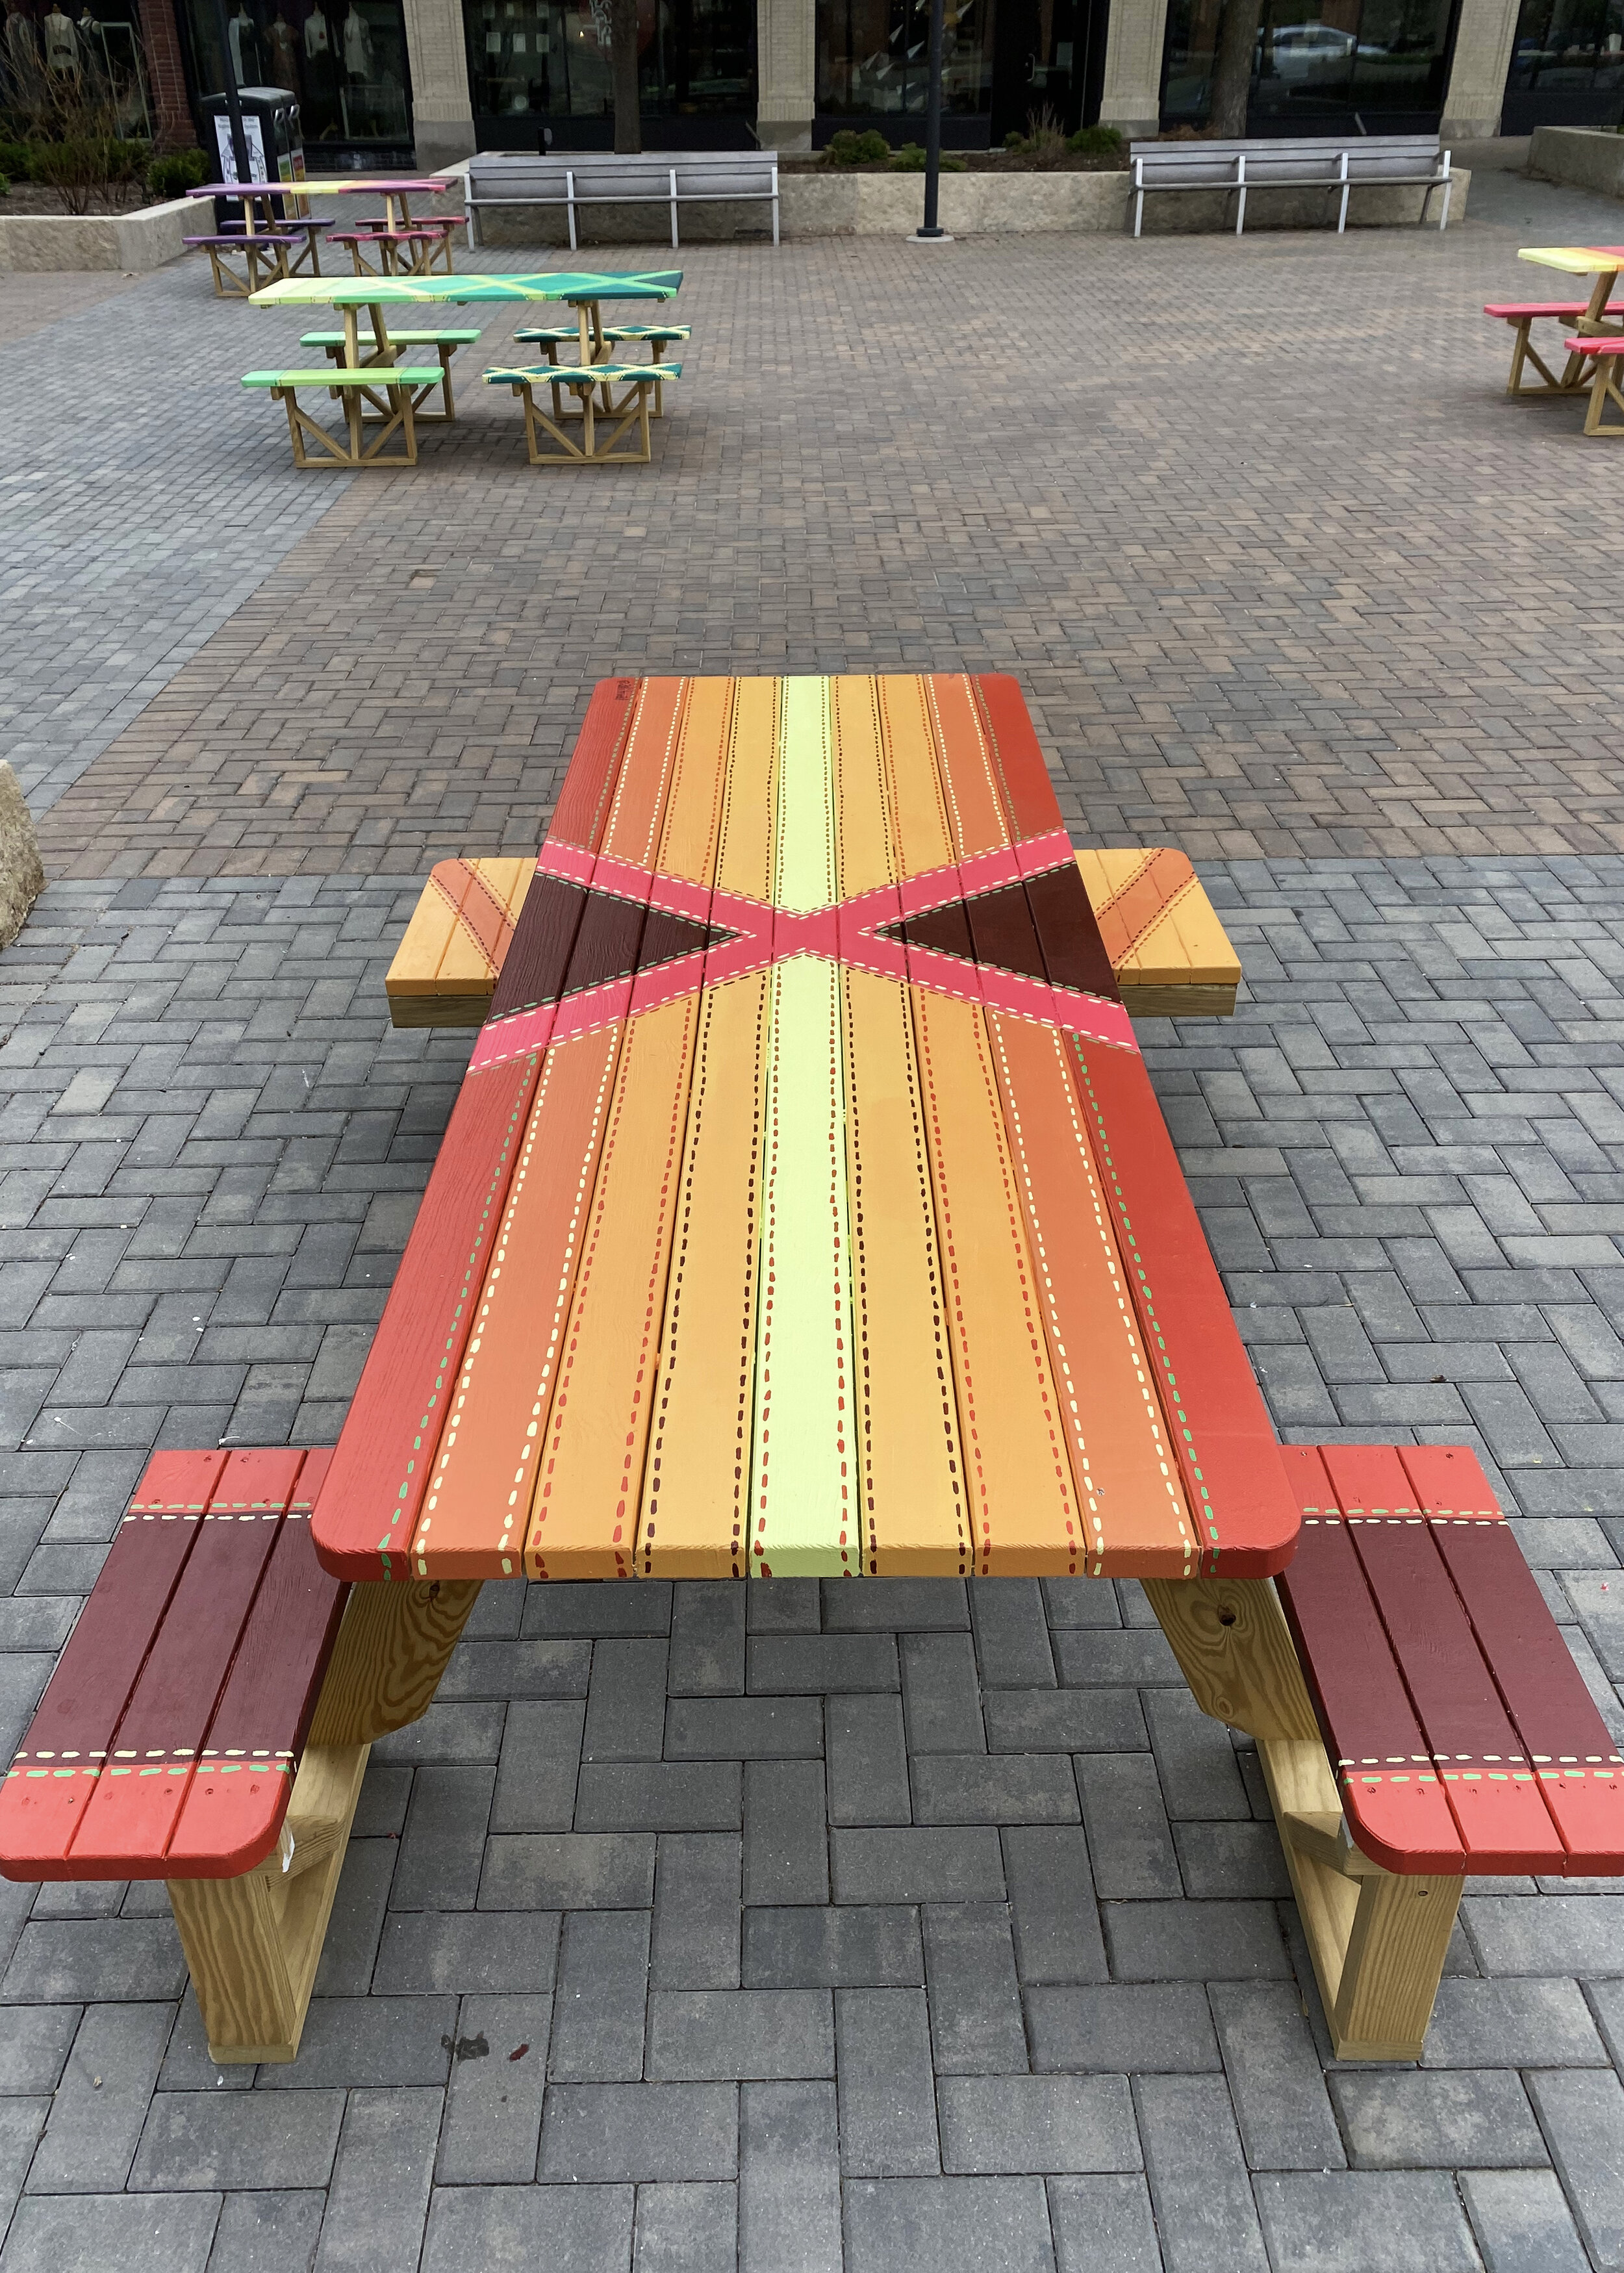   Neon Quilts  (one of six picnic tables). 2020. Iowa City, IA.  